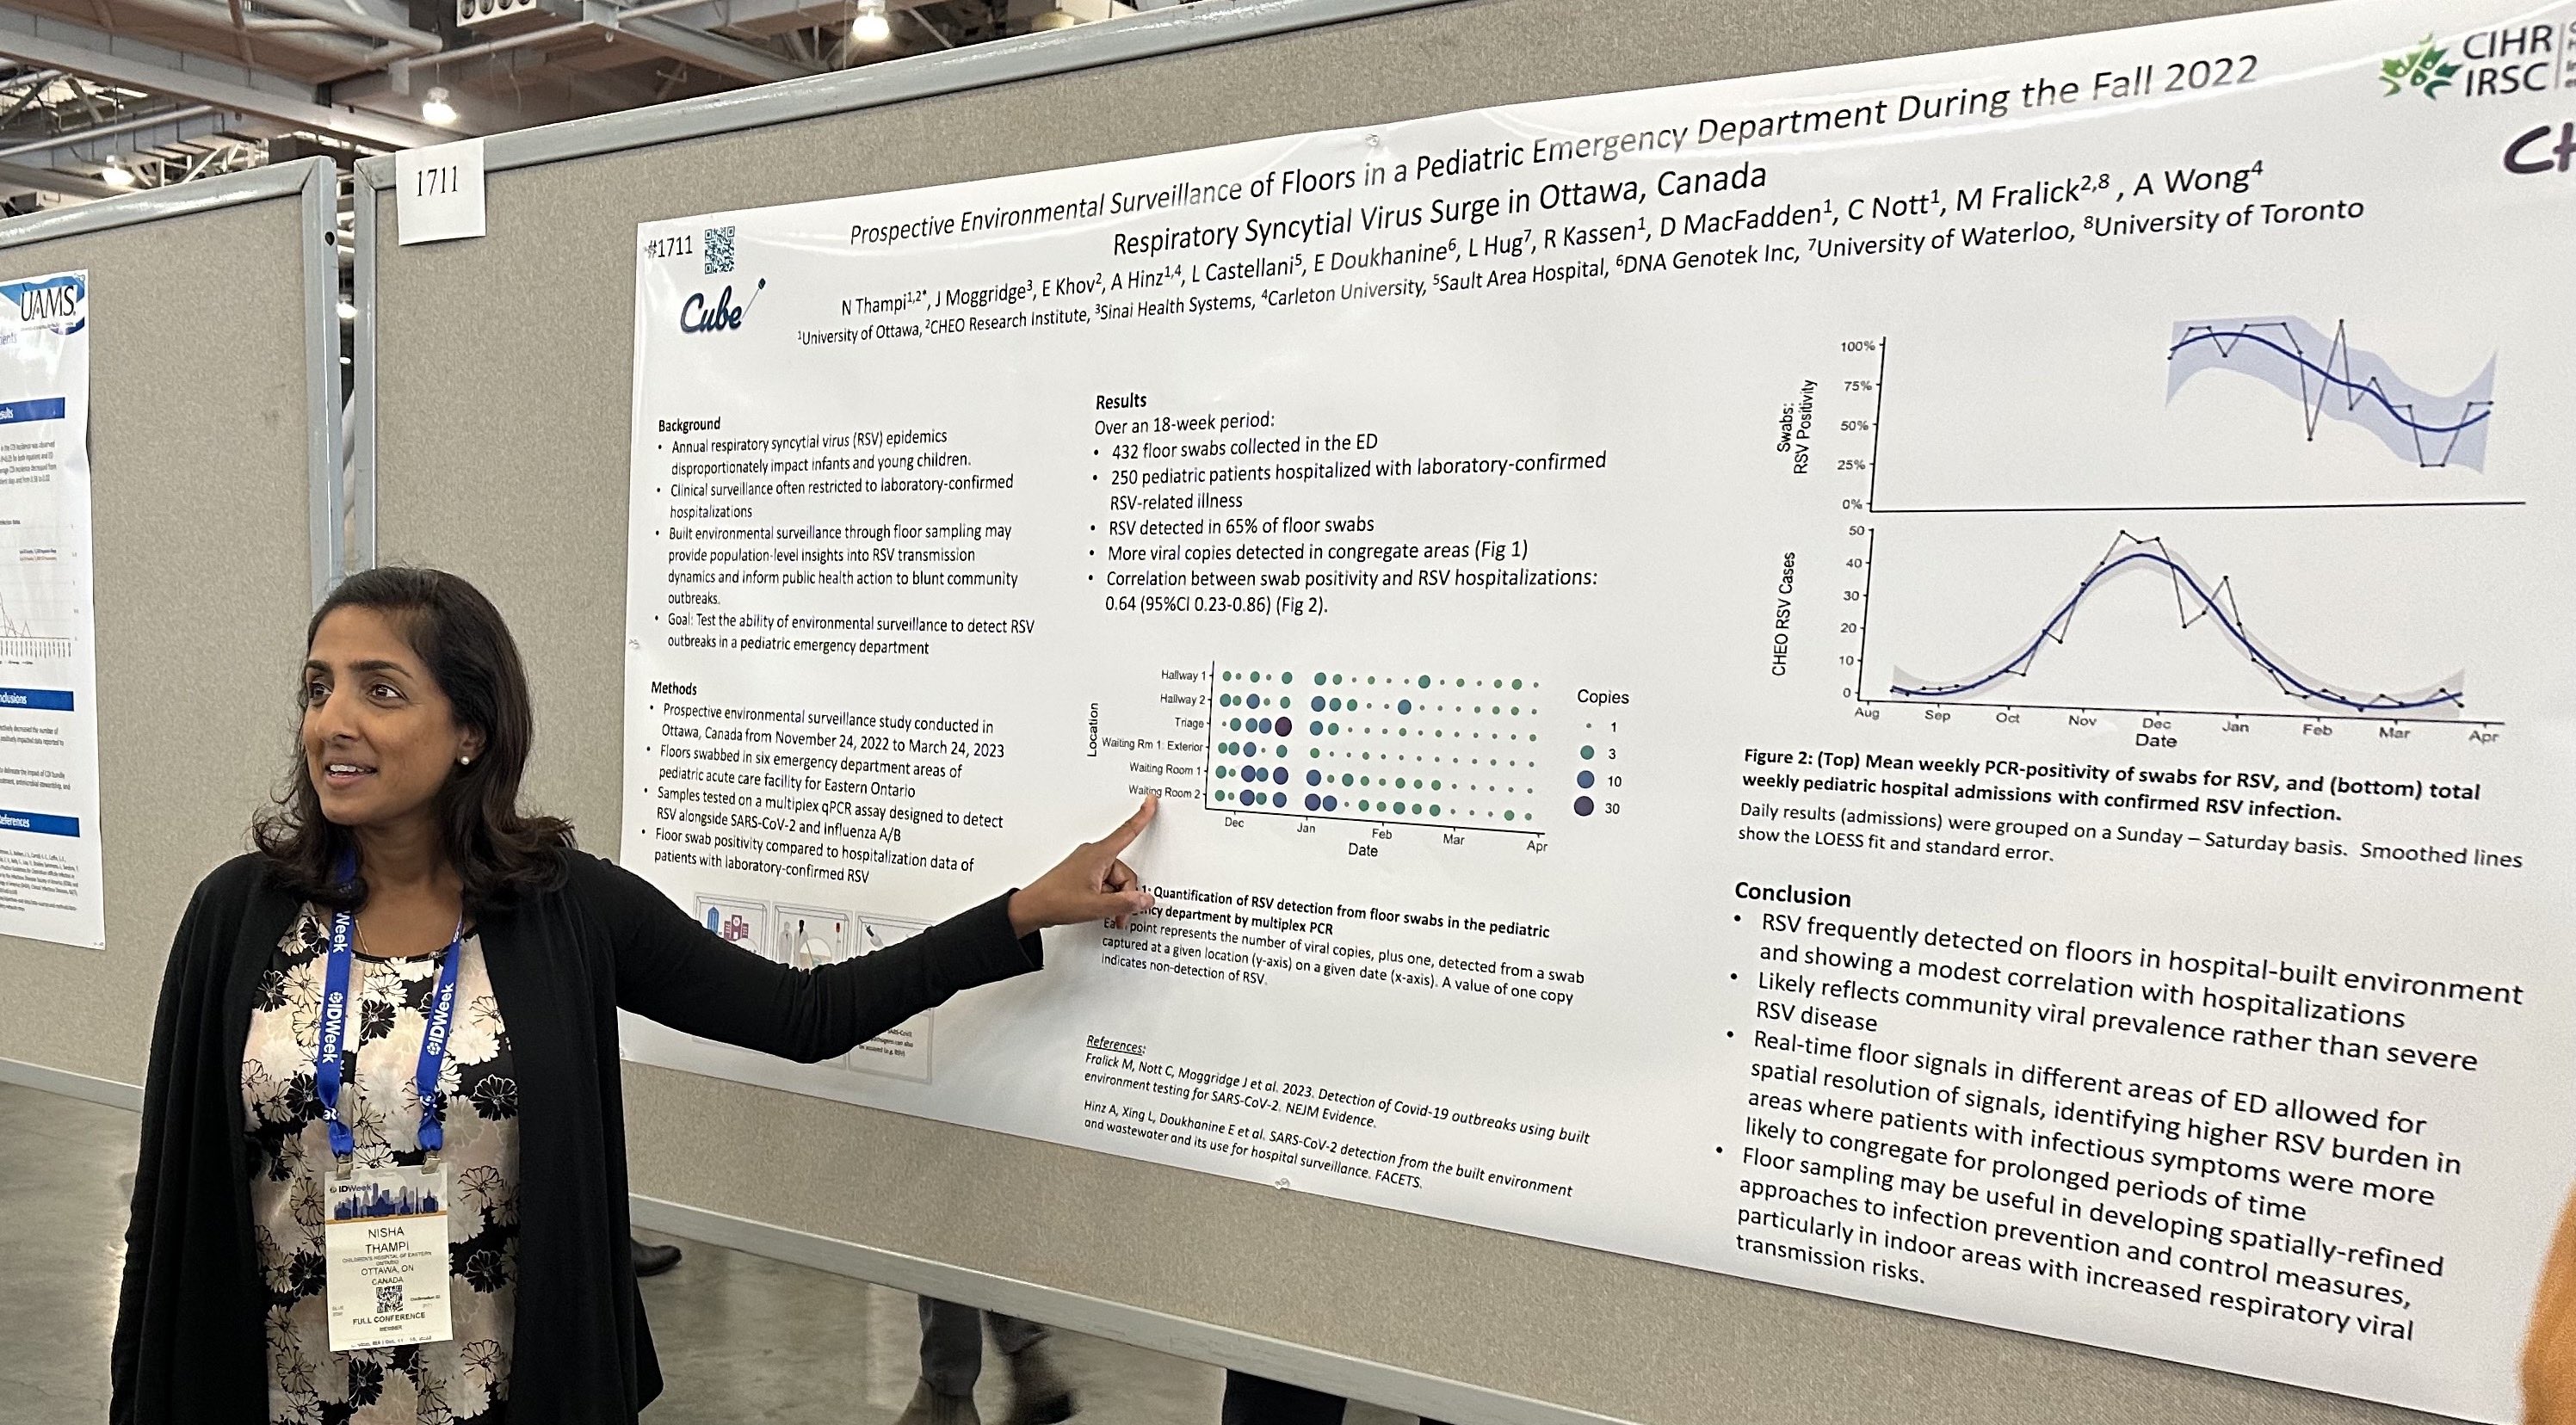 Dr. Nisha Thampi presents her poster “Propective Environmental Surveillance of Floors in a Pediatric Emergency Department During the Fall 2022 Respiratory Synctial Virus Surge in Ottawa, Canada” at IDWeek 2023.